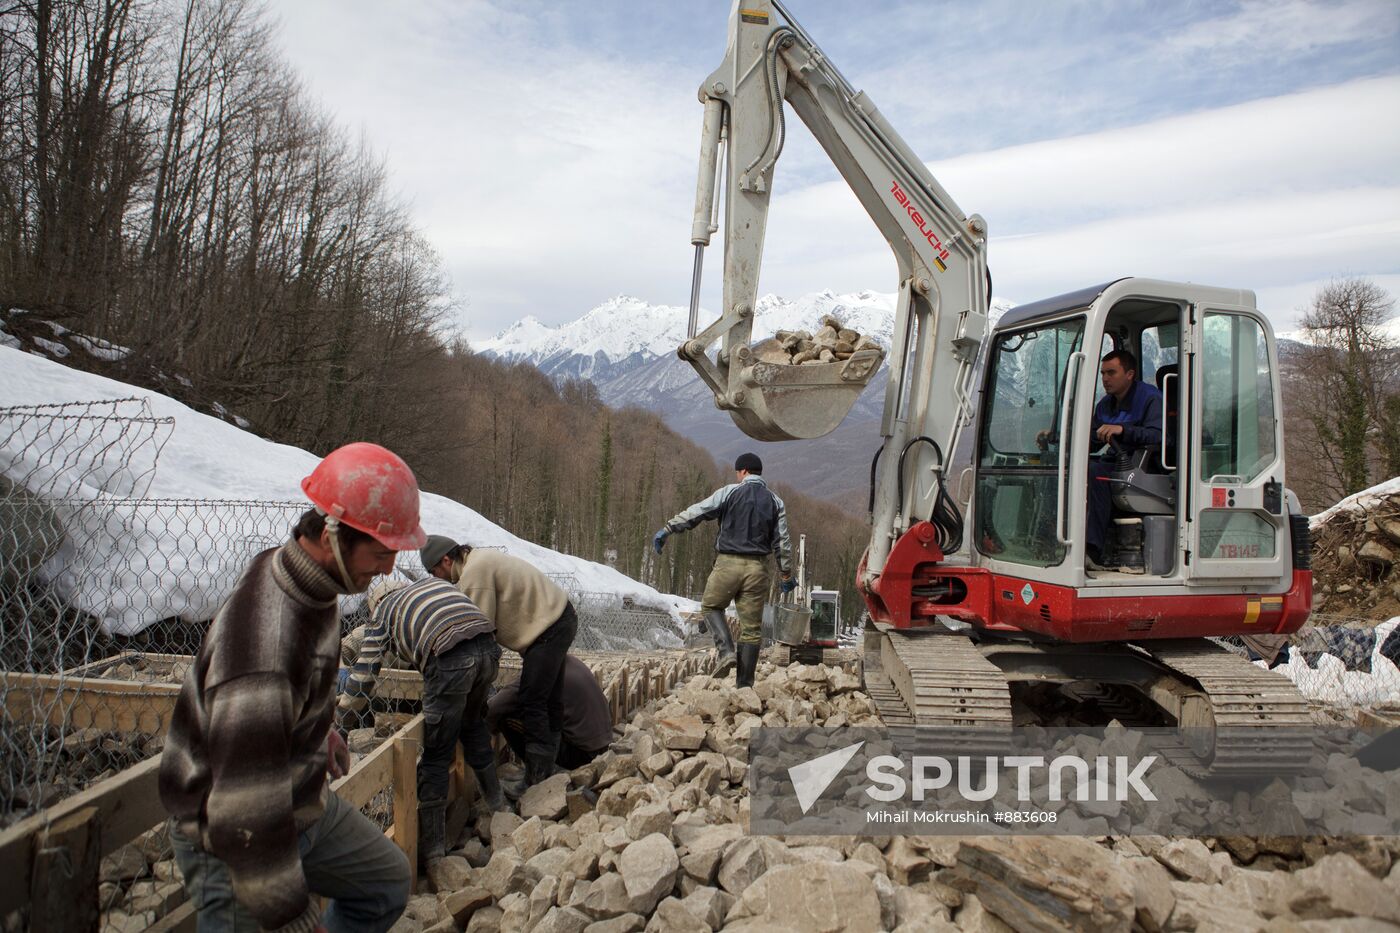 Sochi Olympic facilities construction site